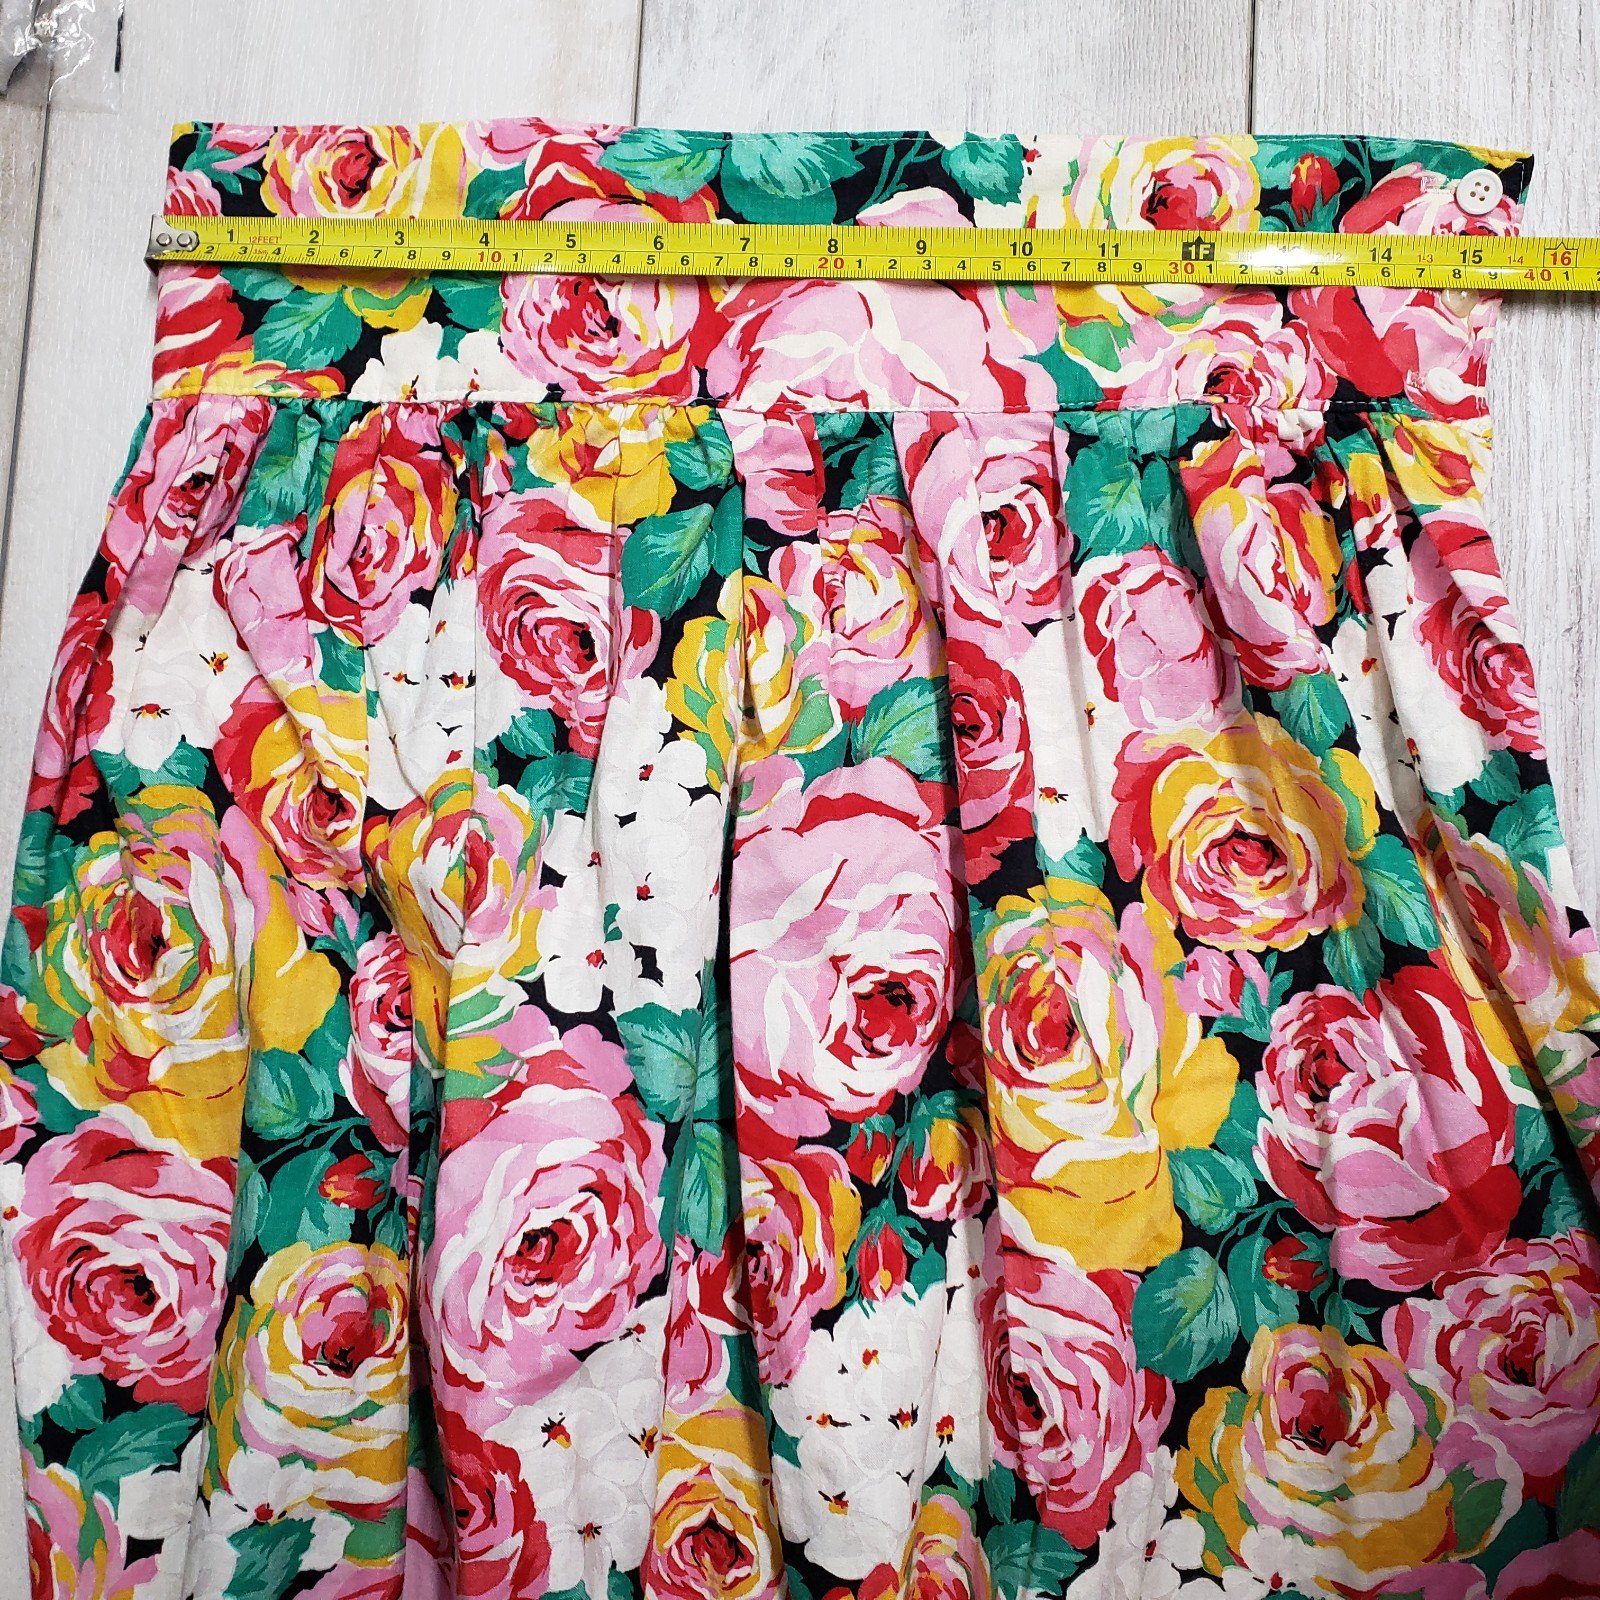 good price Vintage Cotton Floral Midi Skirt Colorful Side Closure Made in USA oJZIhHQ6b best sale